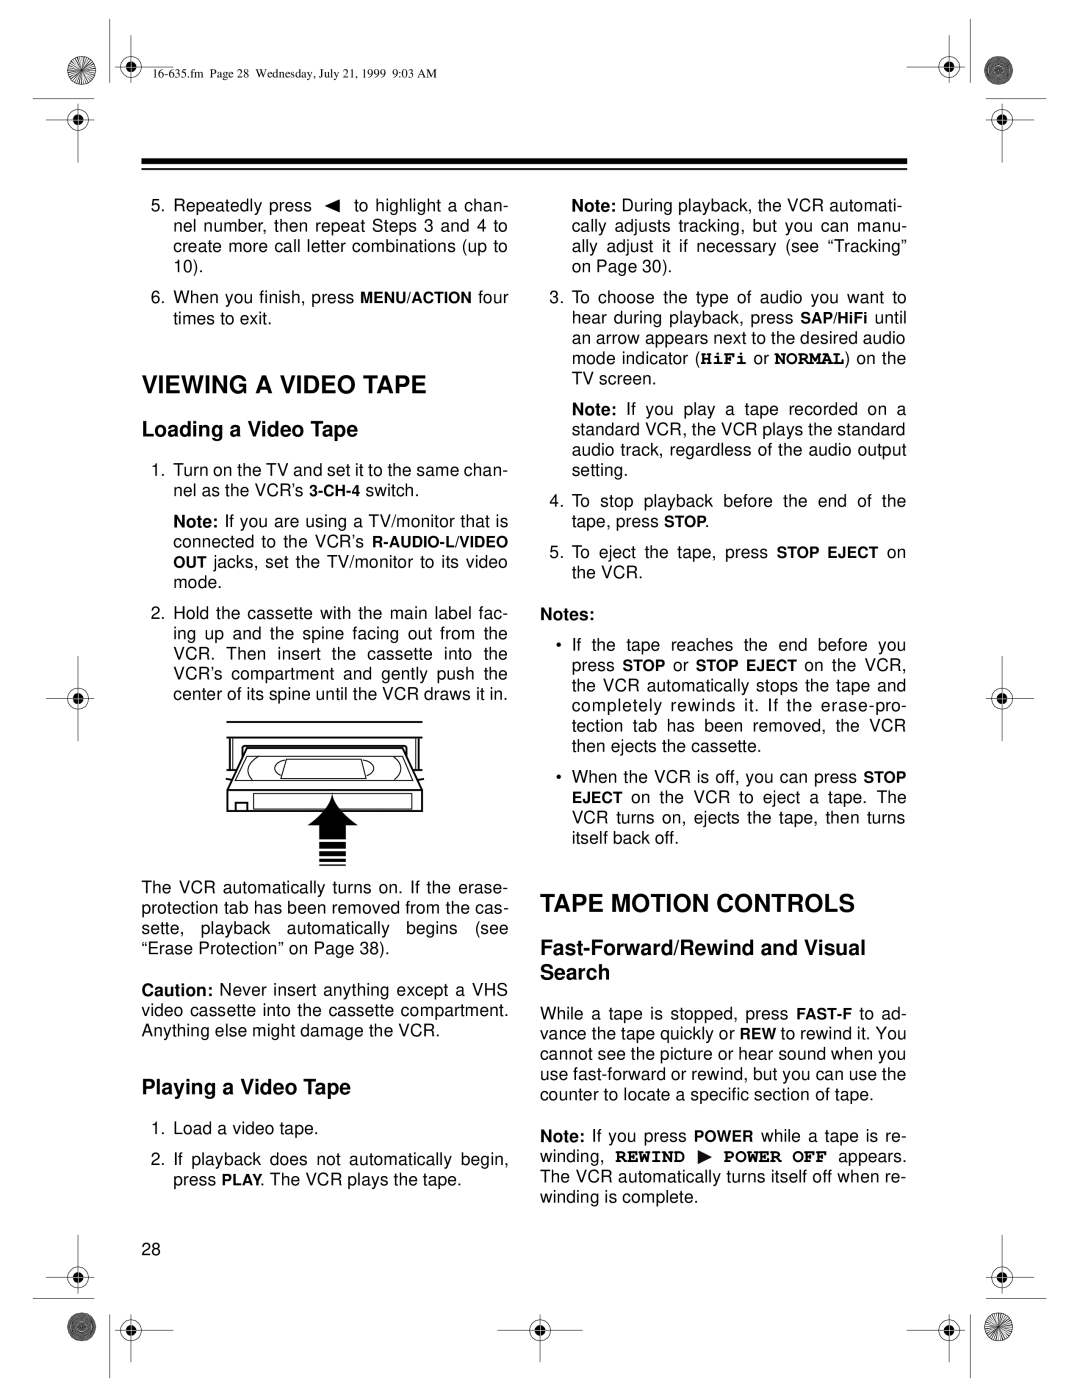 Radio Shack 66 owner manual Viewing A Video Tape, Tape Motion Controls, Loading a Video Tape, Playing a Video Tape 